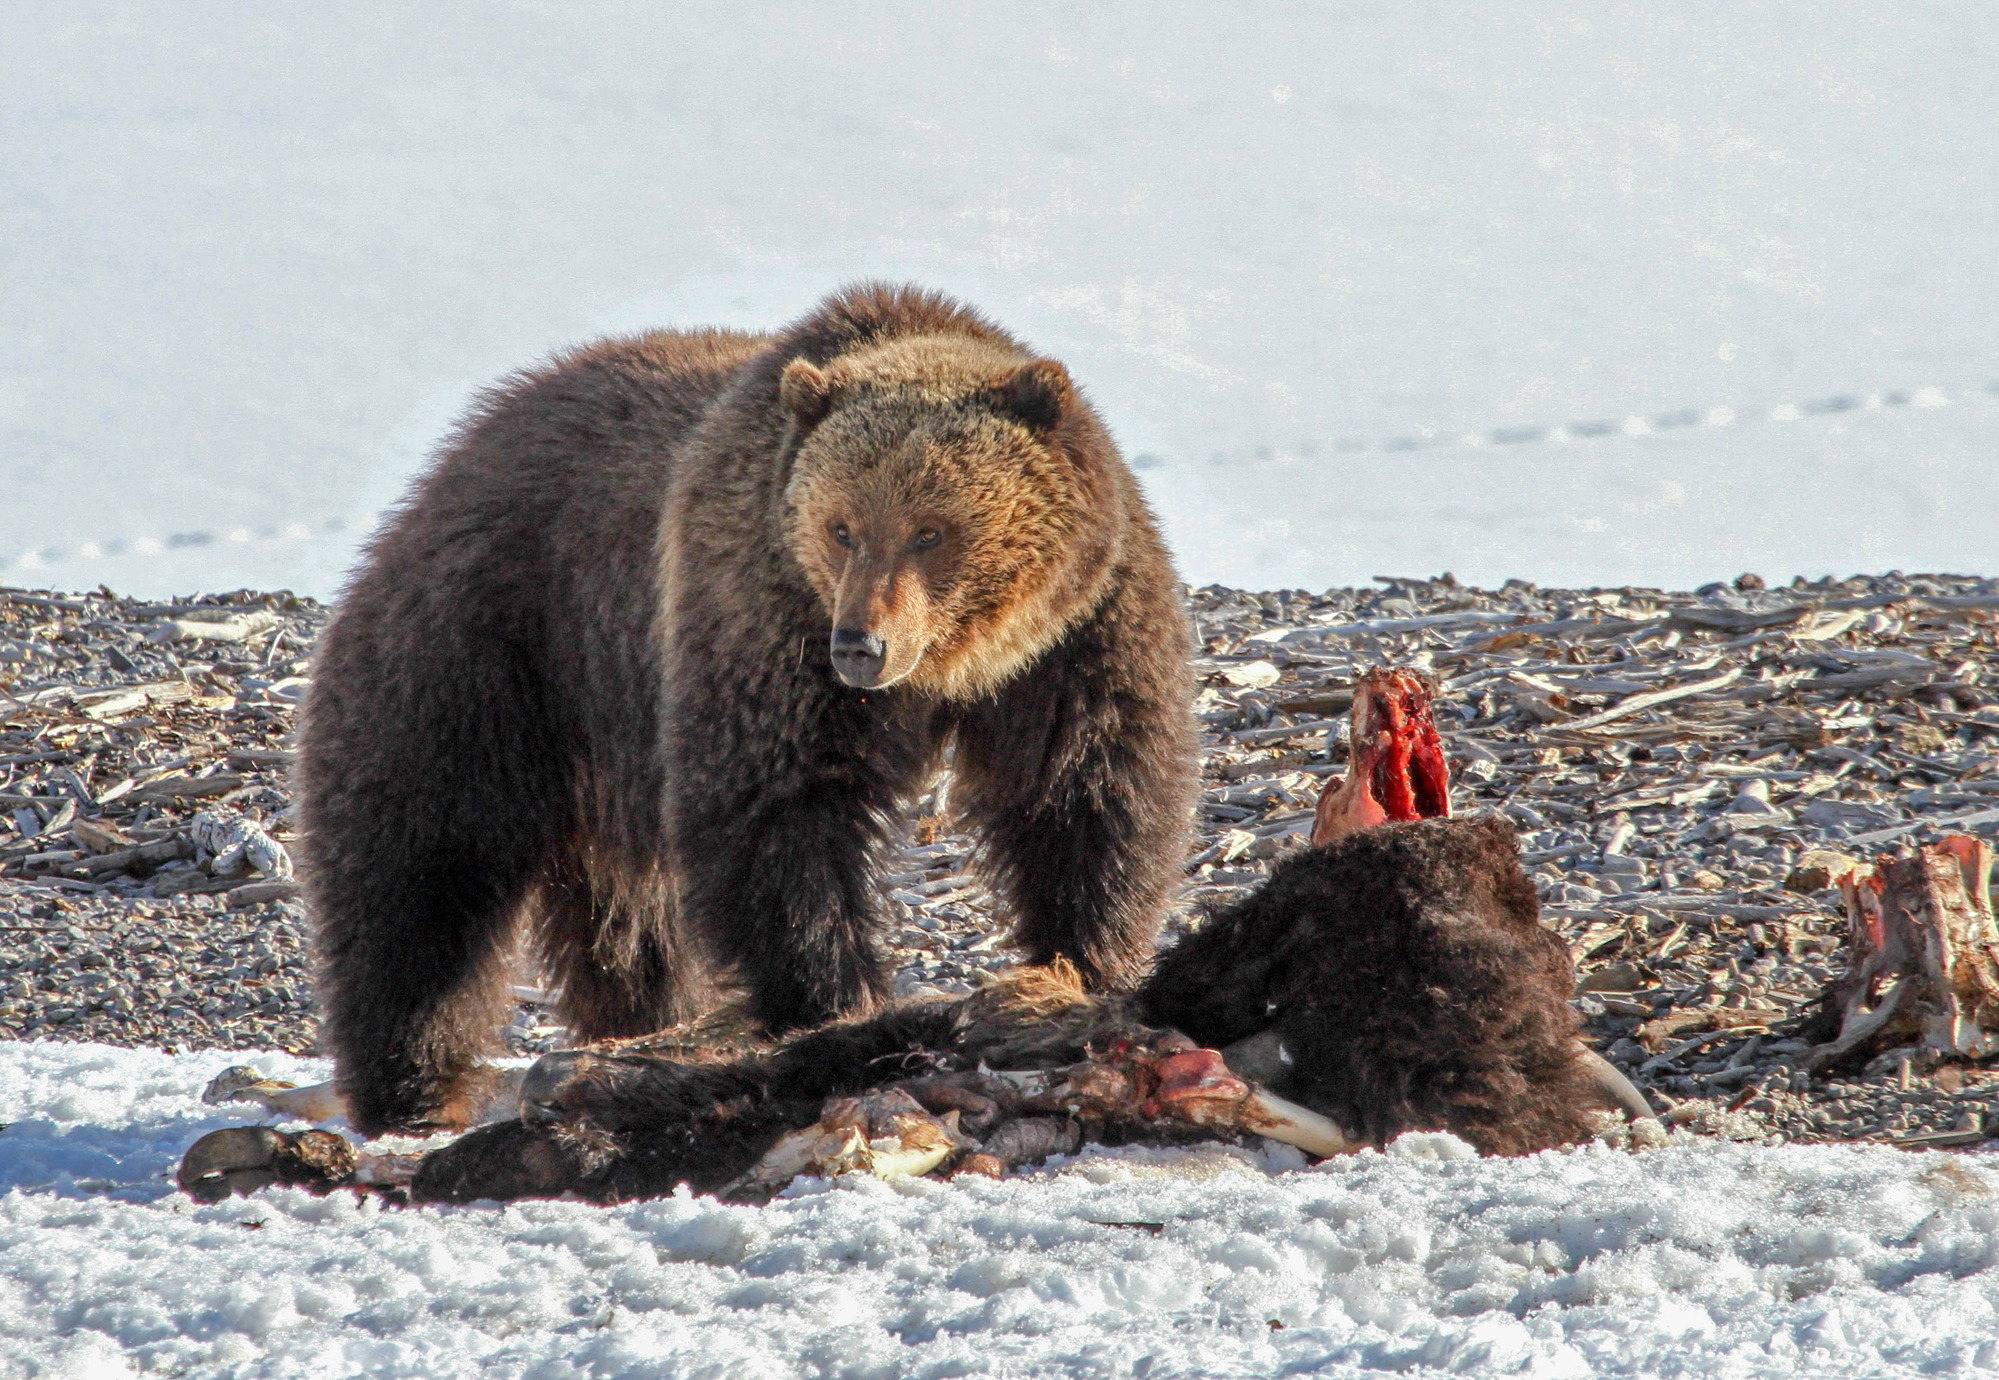 A grizzly bear is on top of a bison carcass with snow covered Yellowstone Lake in the background.